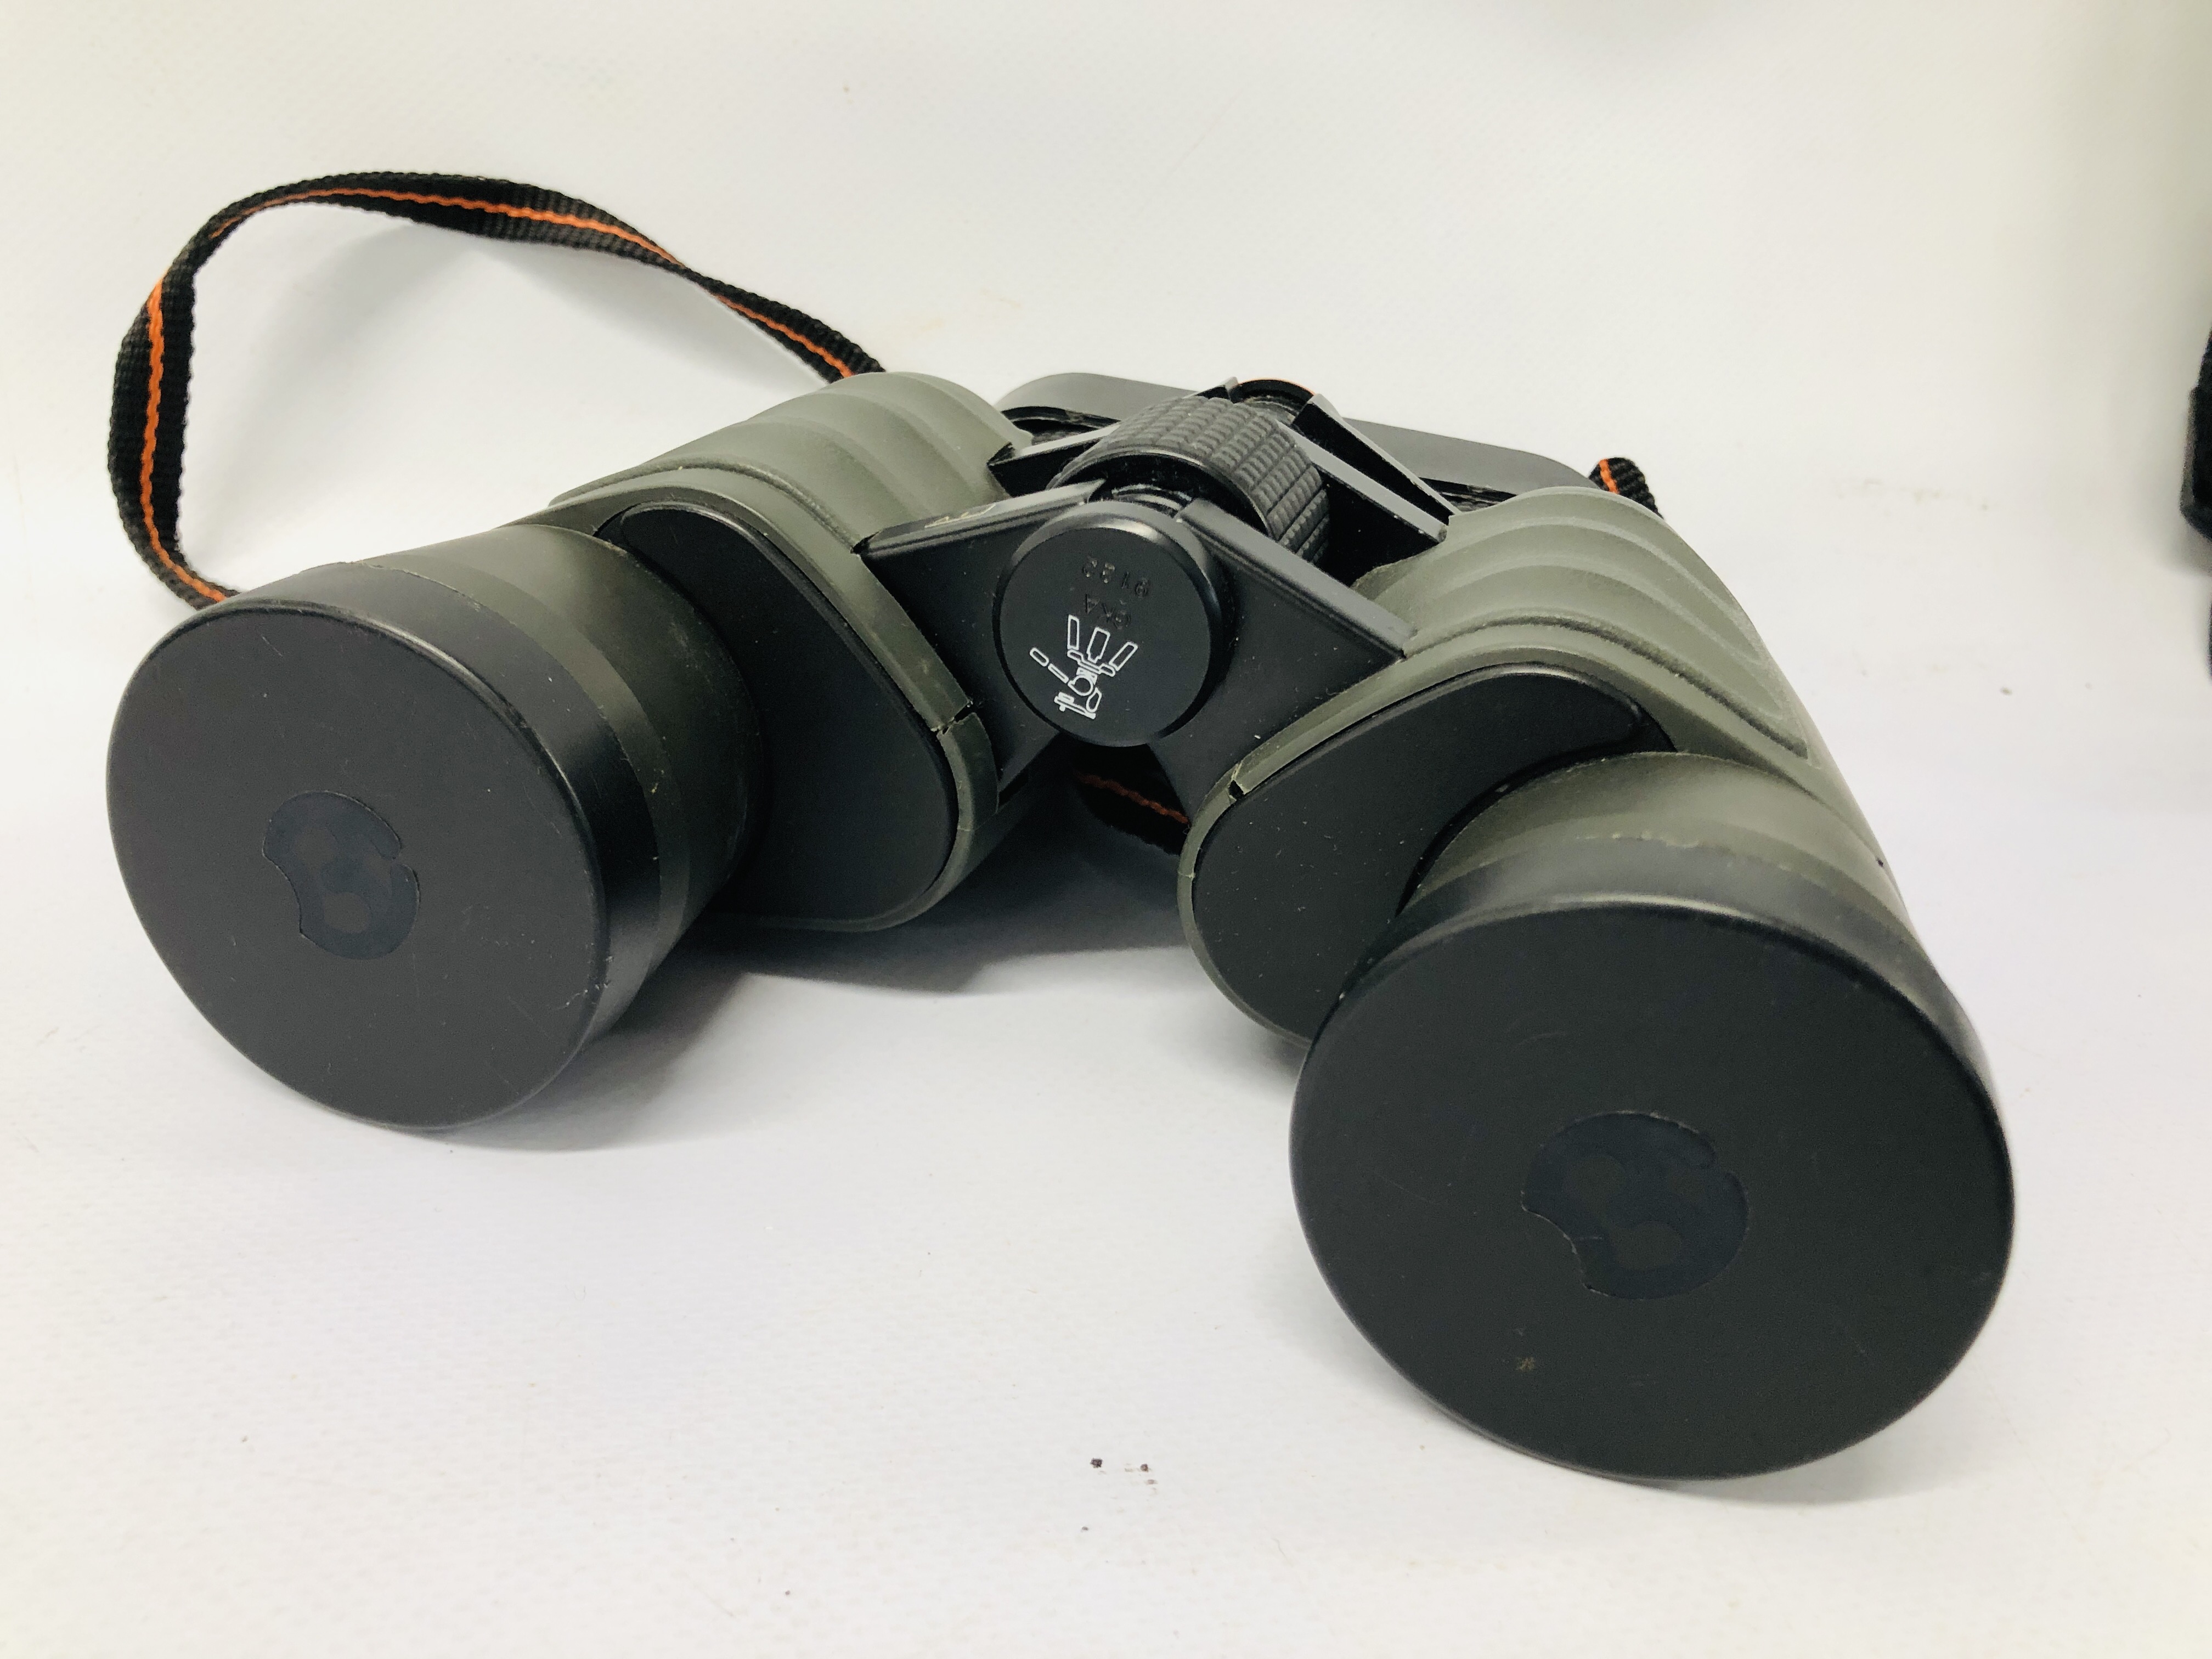 PAIR OF BRESSER 8 X 40 BINOCULARS WITH CASE ALONG WITH A PAIR OF VISTA QUEST BINOCULARS AND CASE - Image 4 of 11